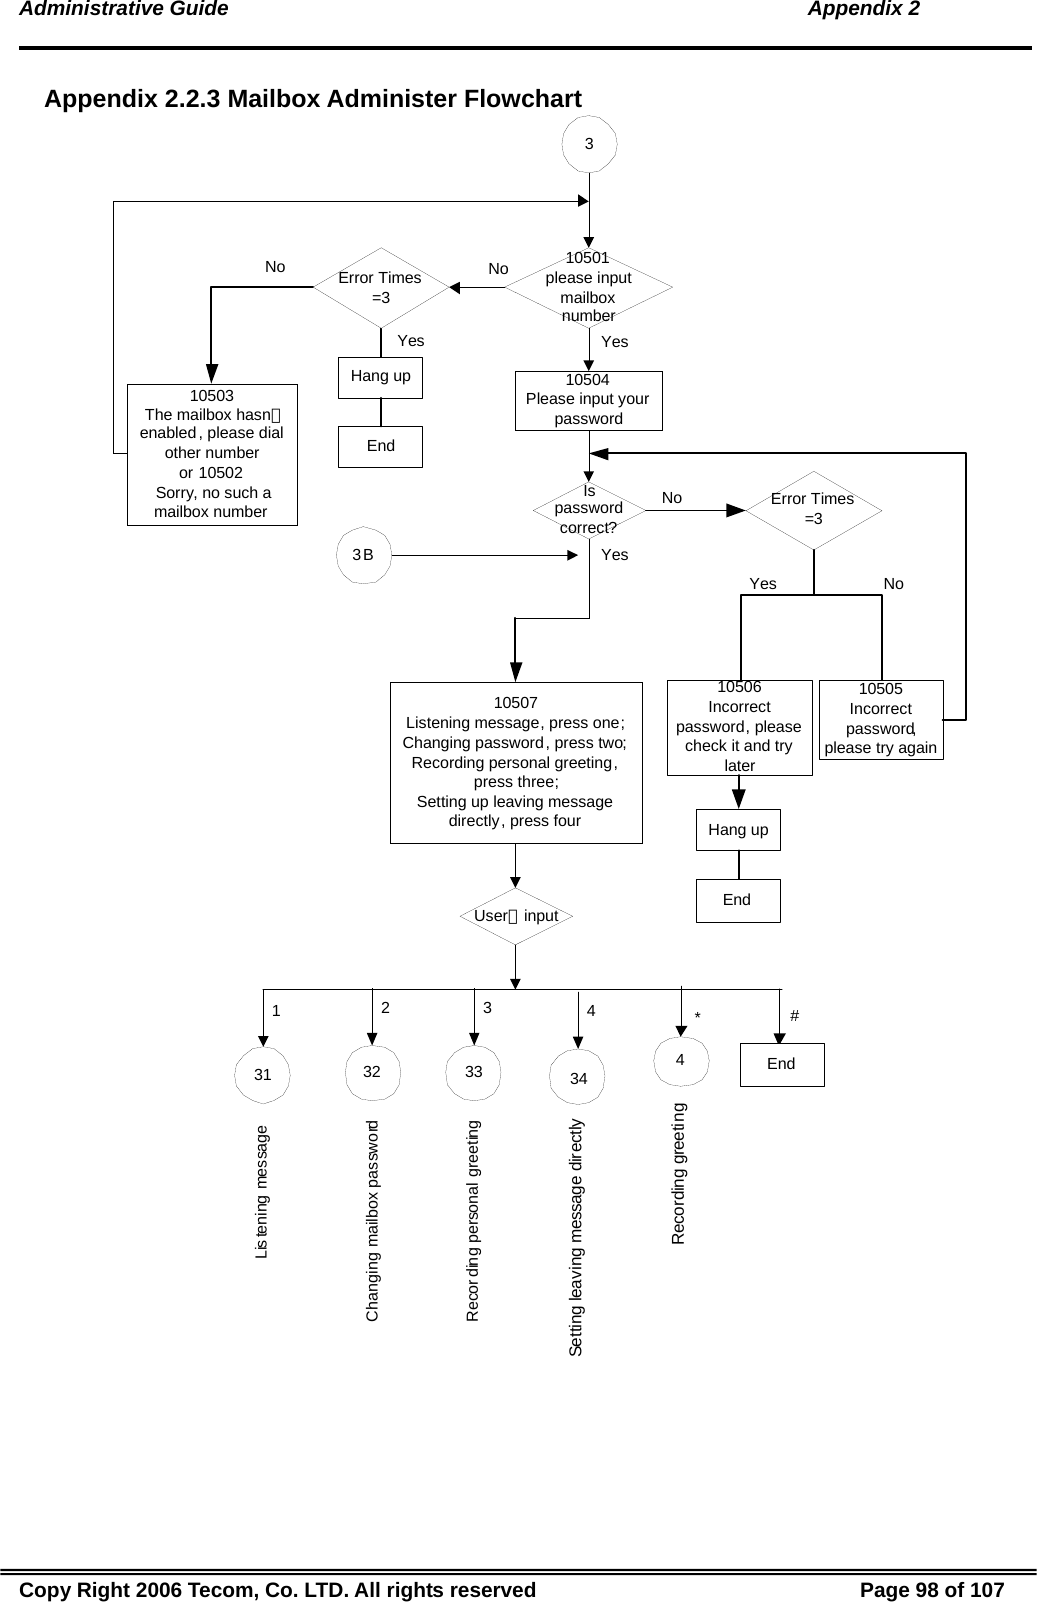 Administrative Guide  Appendix 2 Appendix 2.2.3 Mailbox Administer Flowchart 10504Please input yourpasswordIspasswordcorrect?10507Listening message, press one;Changing password, press two;Recording personal greeting,press three;Setting up leaving messagedirectly, press fourUser抯 input10501please inputmailboxnumber10503The mailbox hasn抰enabled, please dialother numberor 10502Sorry, no such amailbox numberNoYesYesNo13B31Lis tening messageHang upEndYesNo10506Incorrectpassword, pleasecheck it and trylaterHang up3Error Times=3Yes NoError Times=310505Incorrectpassword,please try again232Changing mailbox password333Recording personal greeting434Setting leaving message directly*4#EndEndRecording greeting Copy Right 2006 Tecom, Co. LTD. All rights reserved  Page 98 of 107 